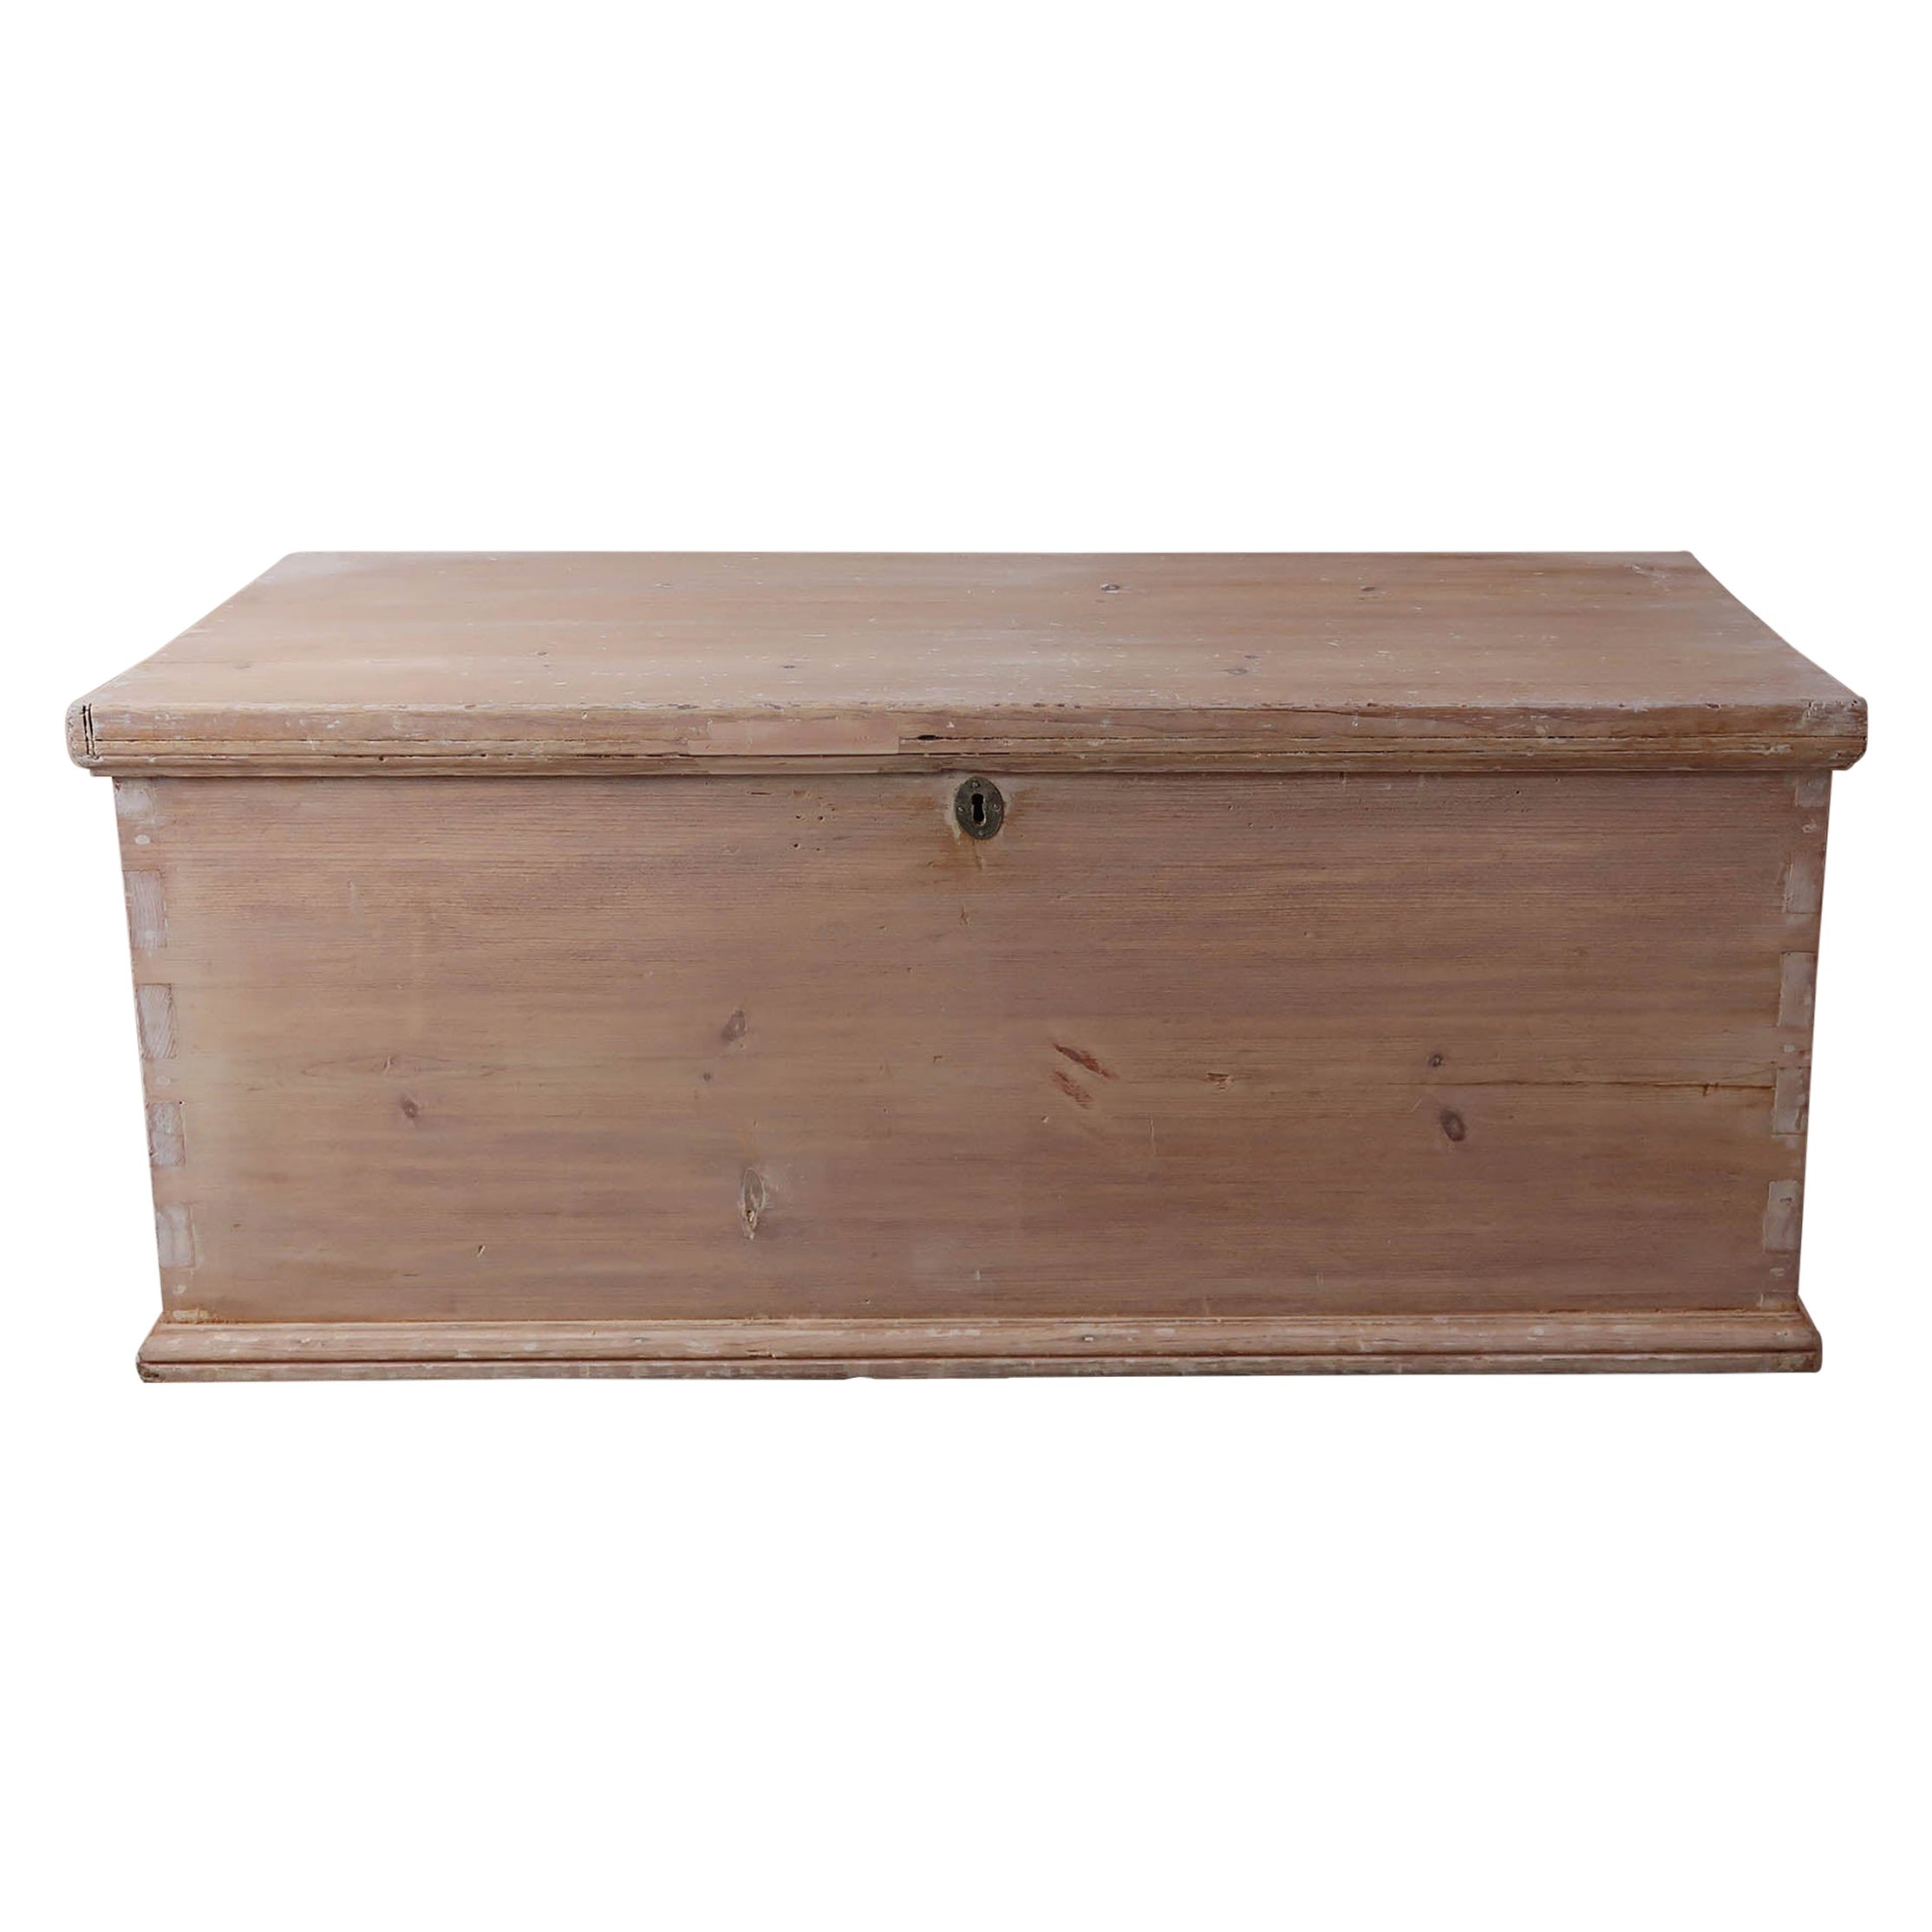 Antique Bleached Pine Blanket Chest, English, 19th Century For Sale